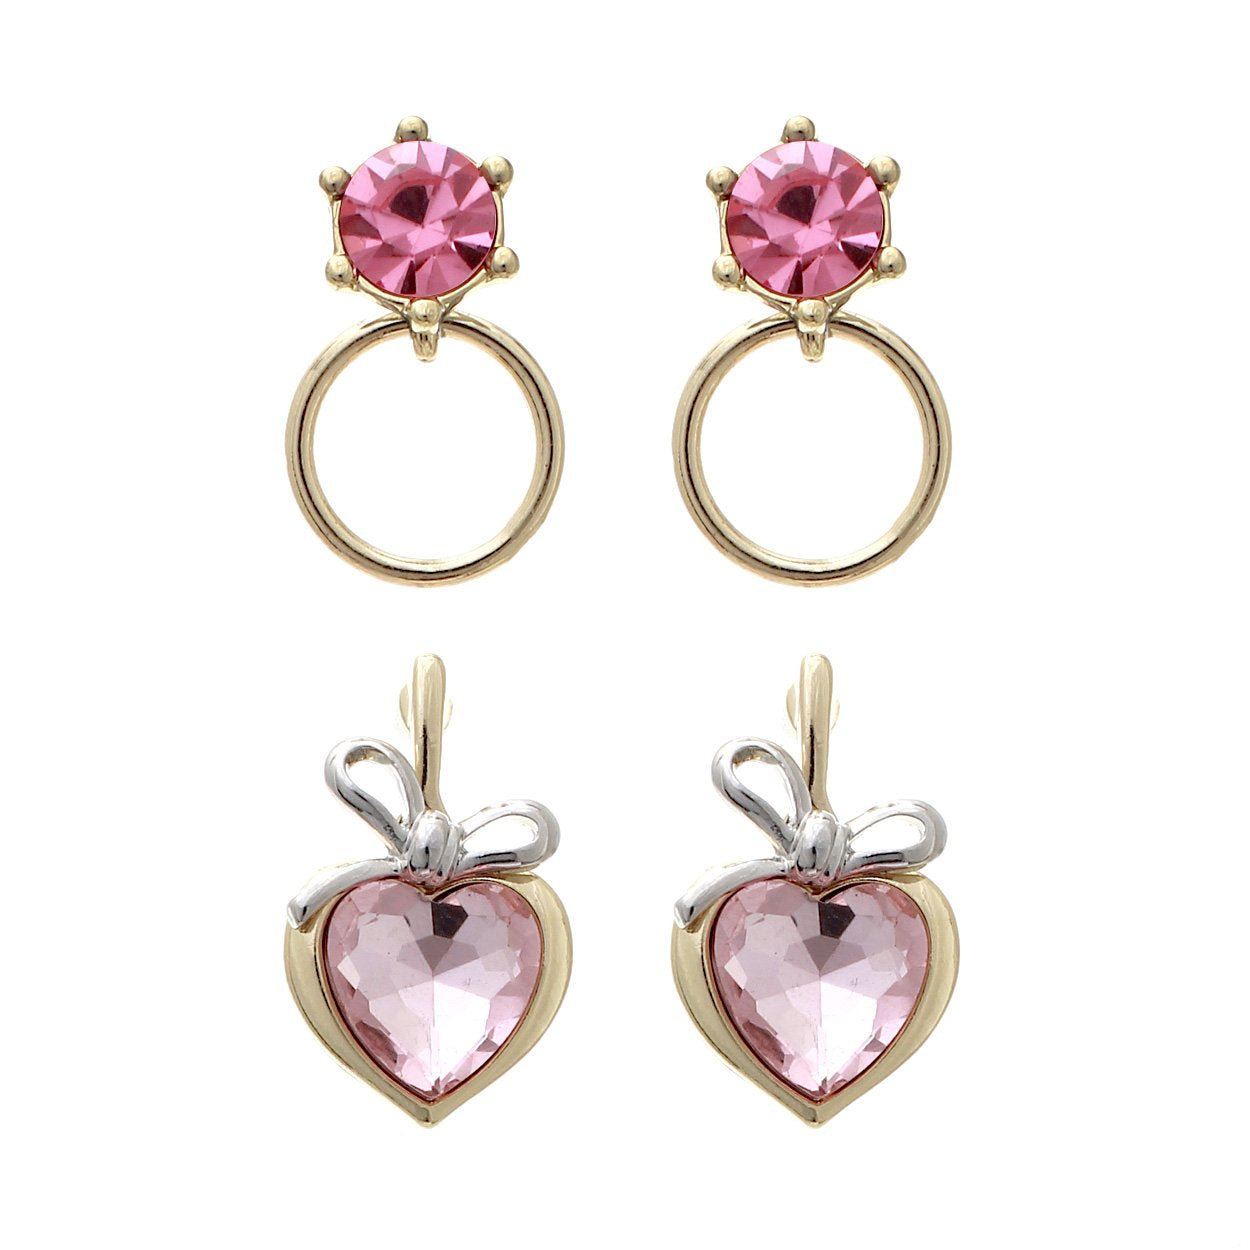 Earrings with Heart shaped Swarovski® crystals - Retha Designs